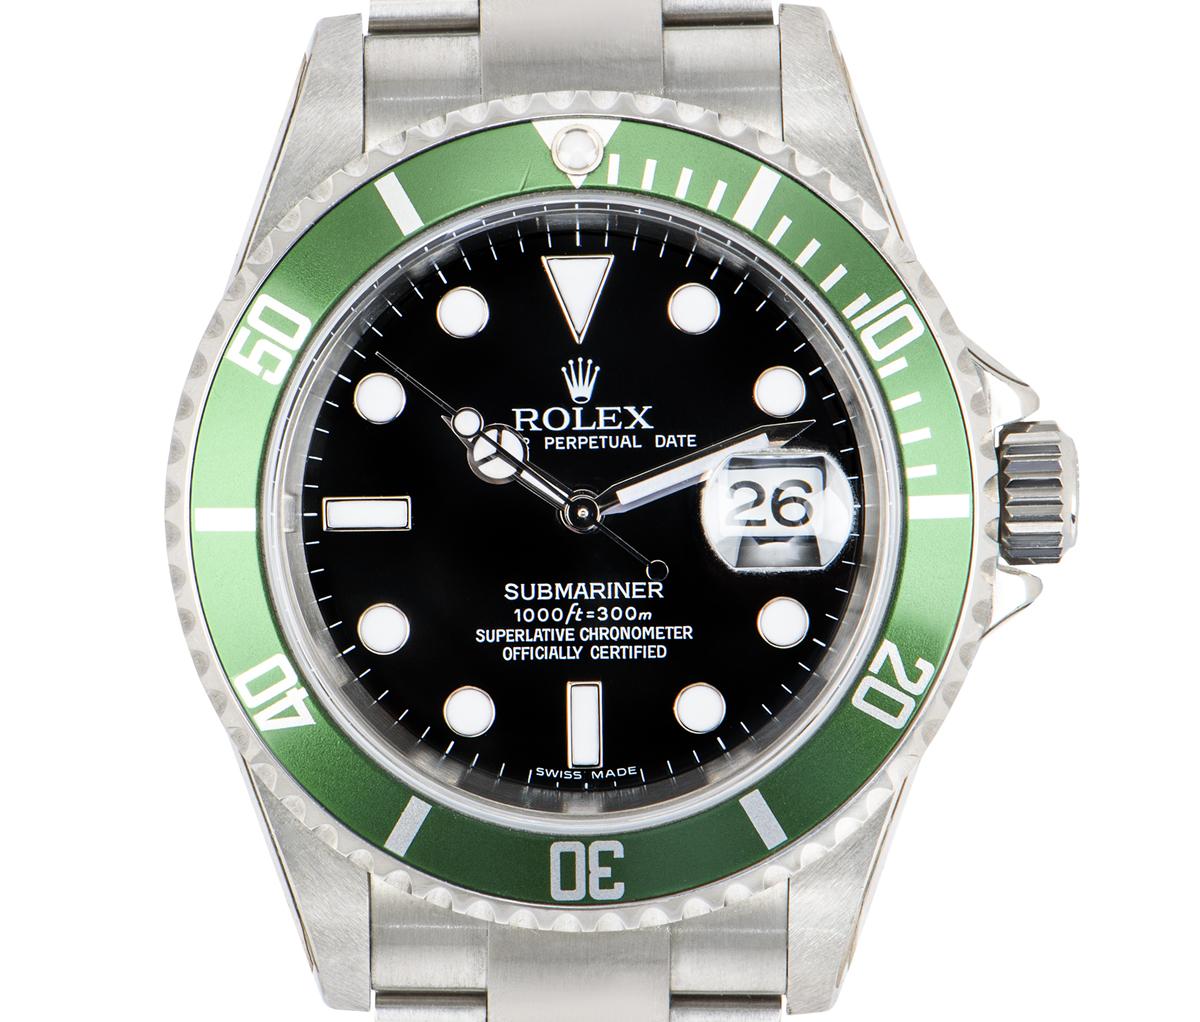 An unworn NOS Submariner Date by Rolex in stainless steel, known as a Kermit. Features a black dial and a green unidirectional rotatable bezel with 60-minute graduations. The Oyster bracelet comes equipped with an Oysterlock deployant clasp. Fitted